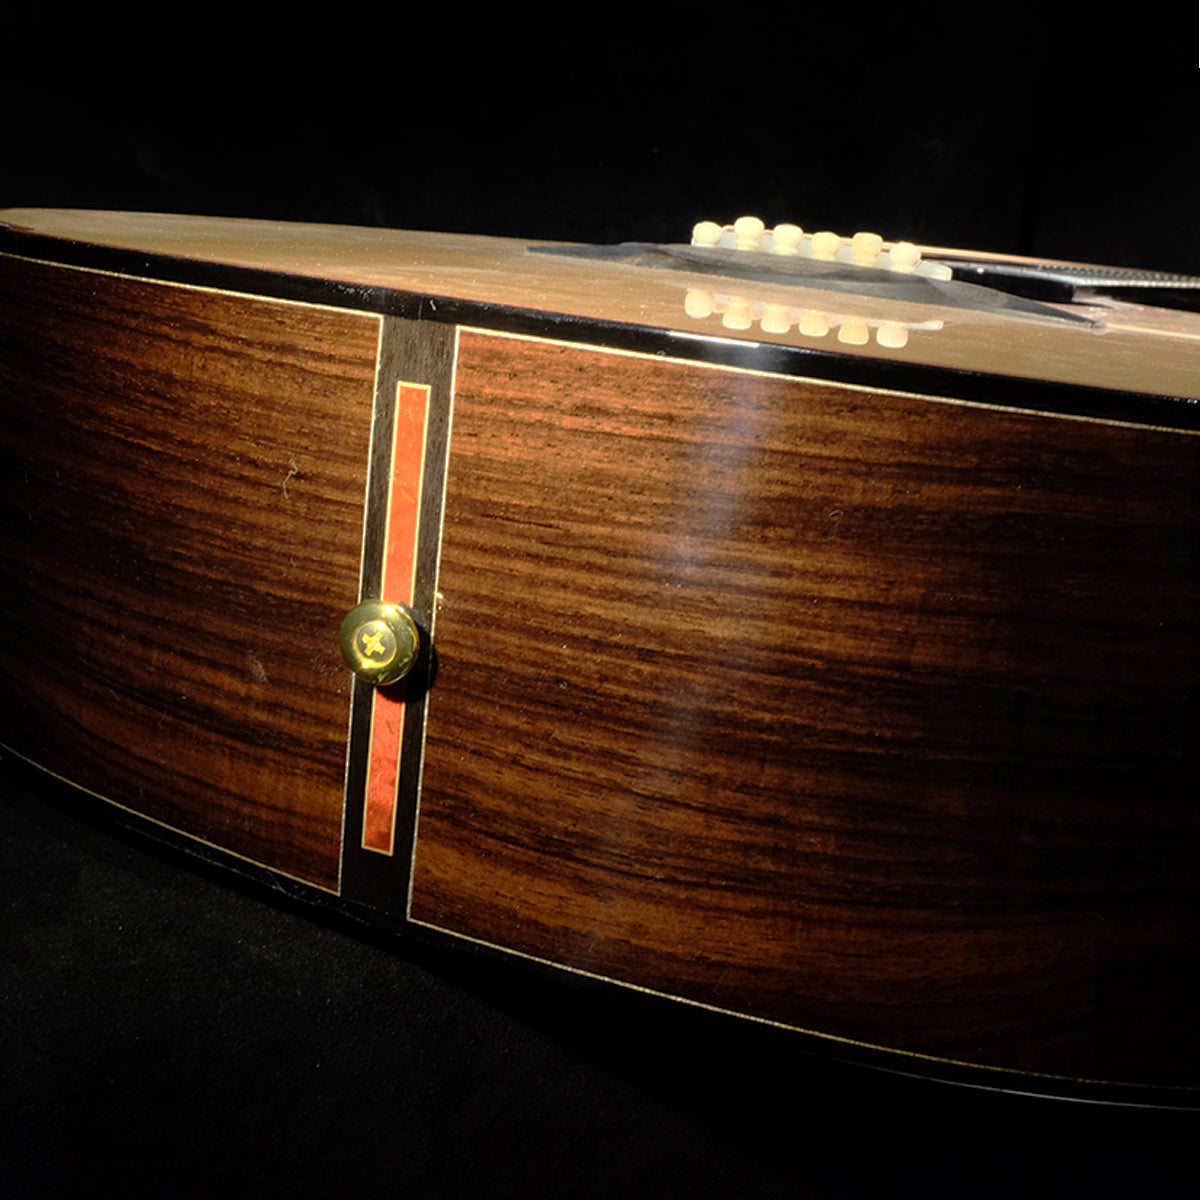 Blue Label MD Sitka Spruce with Indian Rosewood | #184